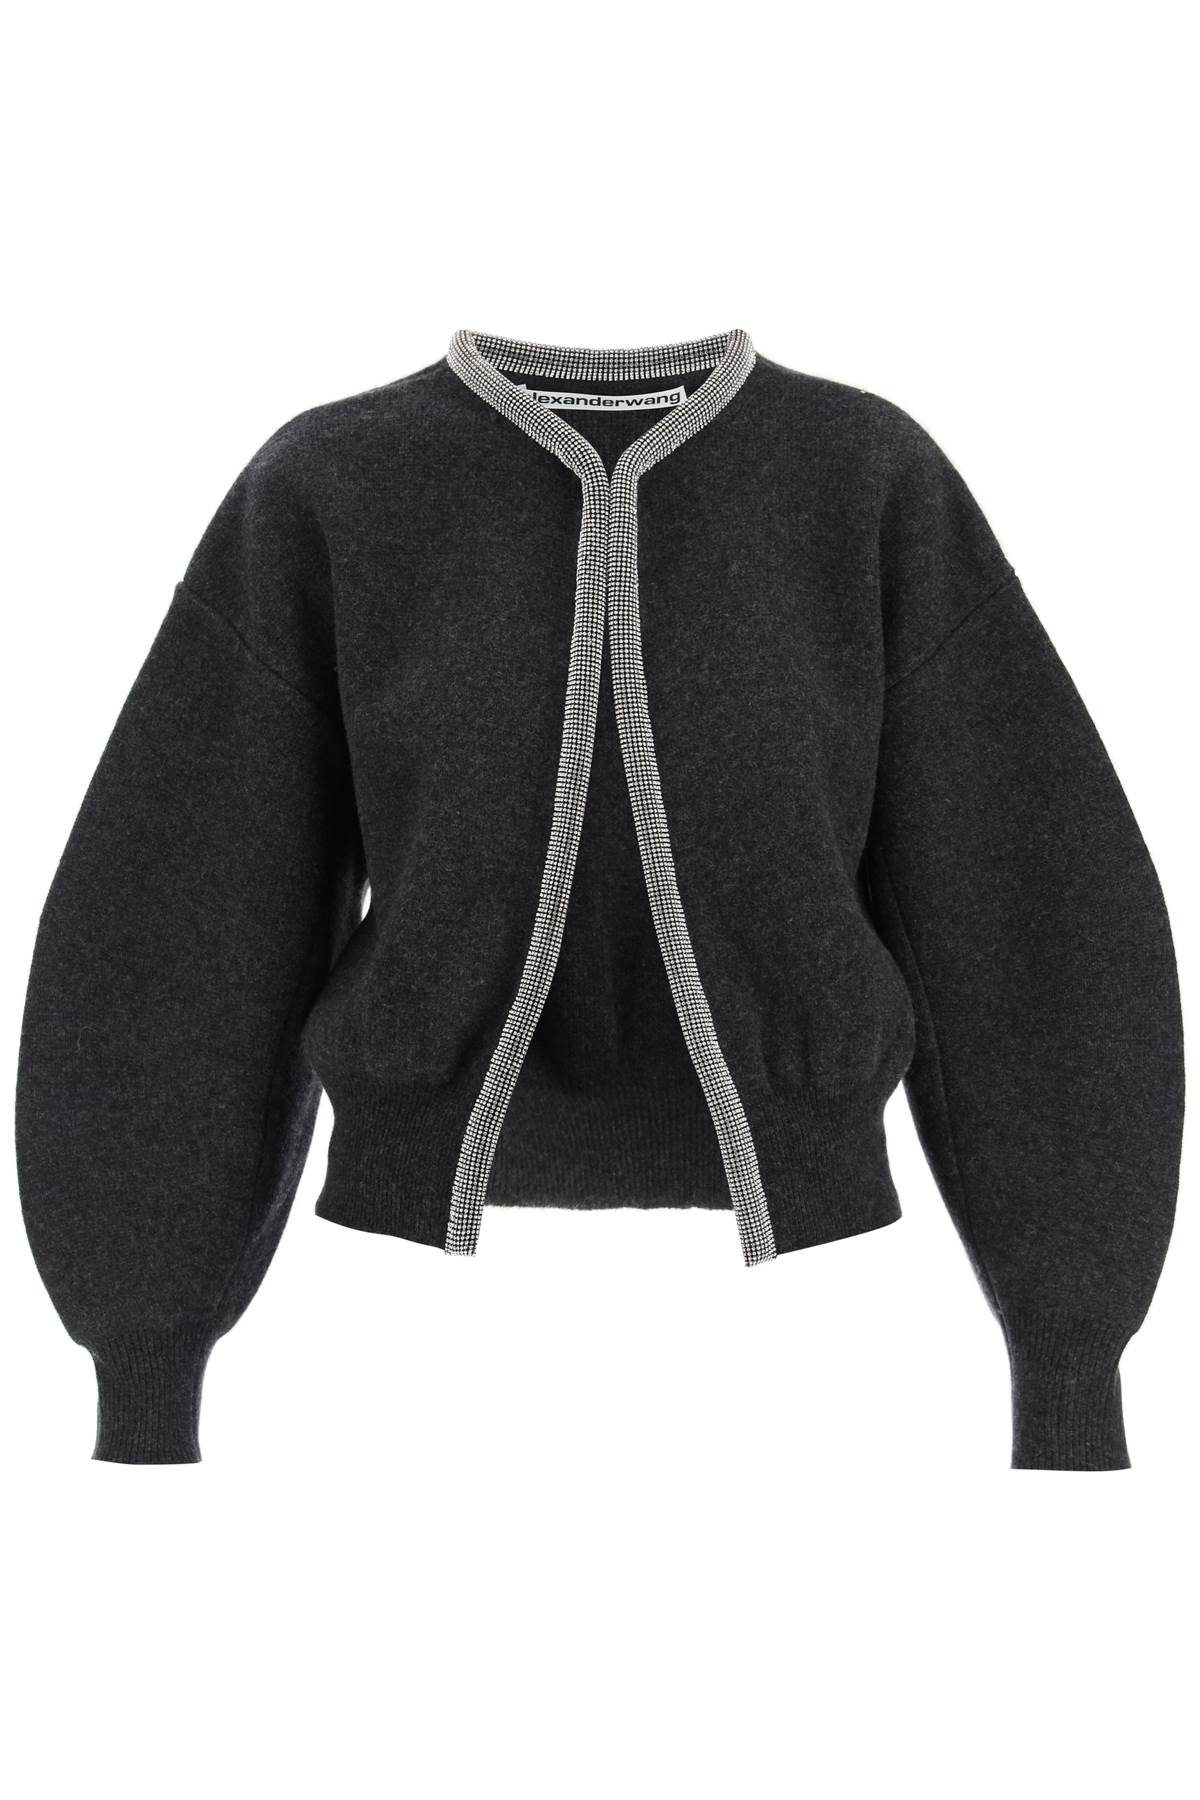 Alexander Wang Cropped Cardigan With Rhinestone Trimming